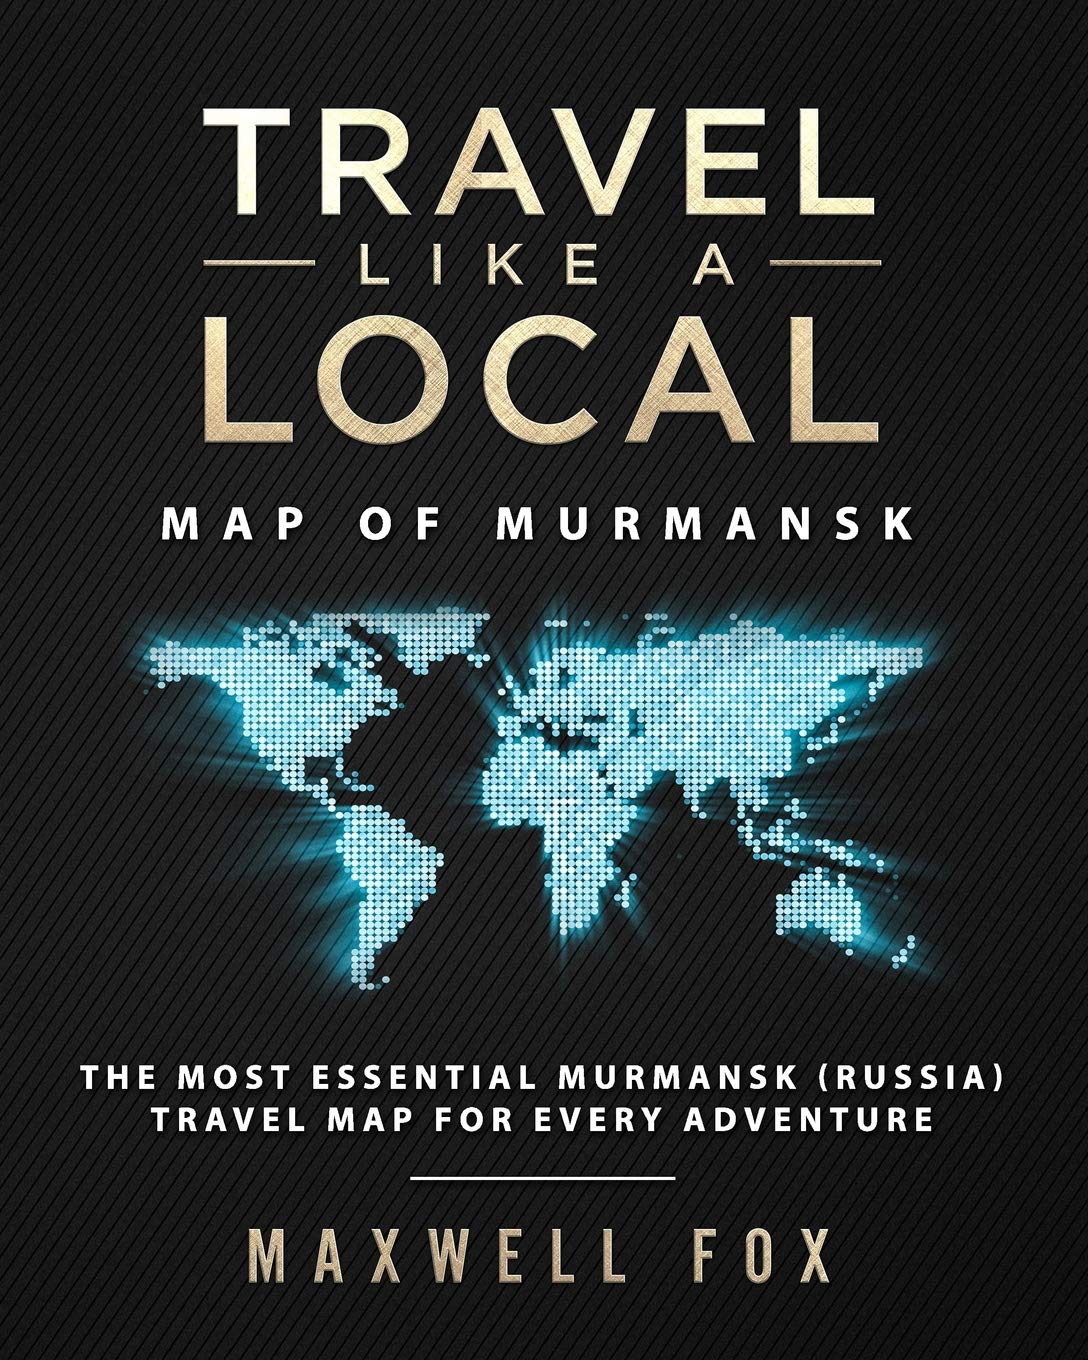 Travel Like a Local - Map of Murmansk: The Most Essential Murmansk (Russia) Travel Map for Every Adventure